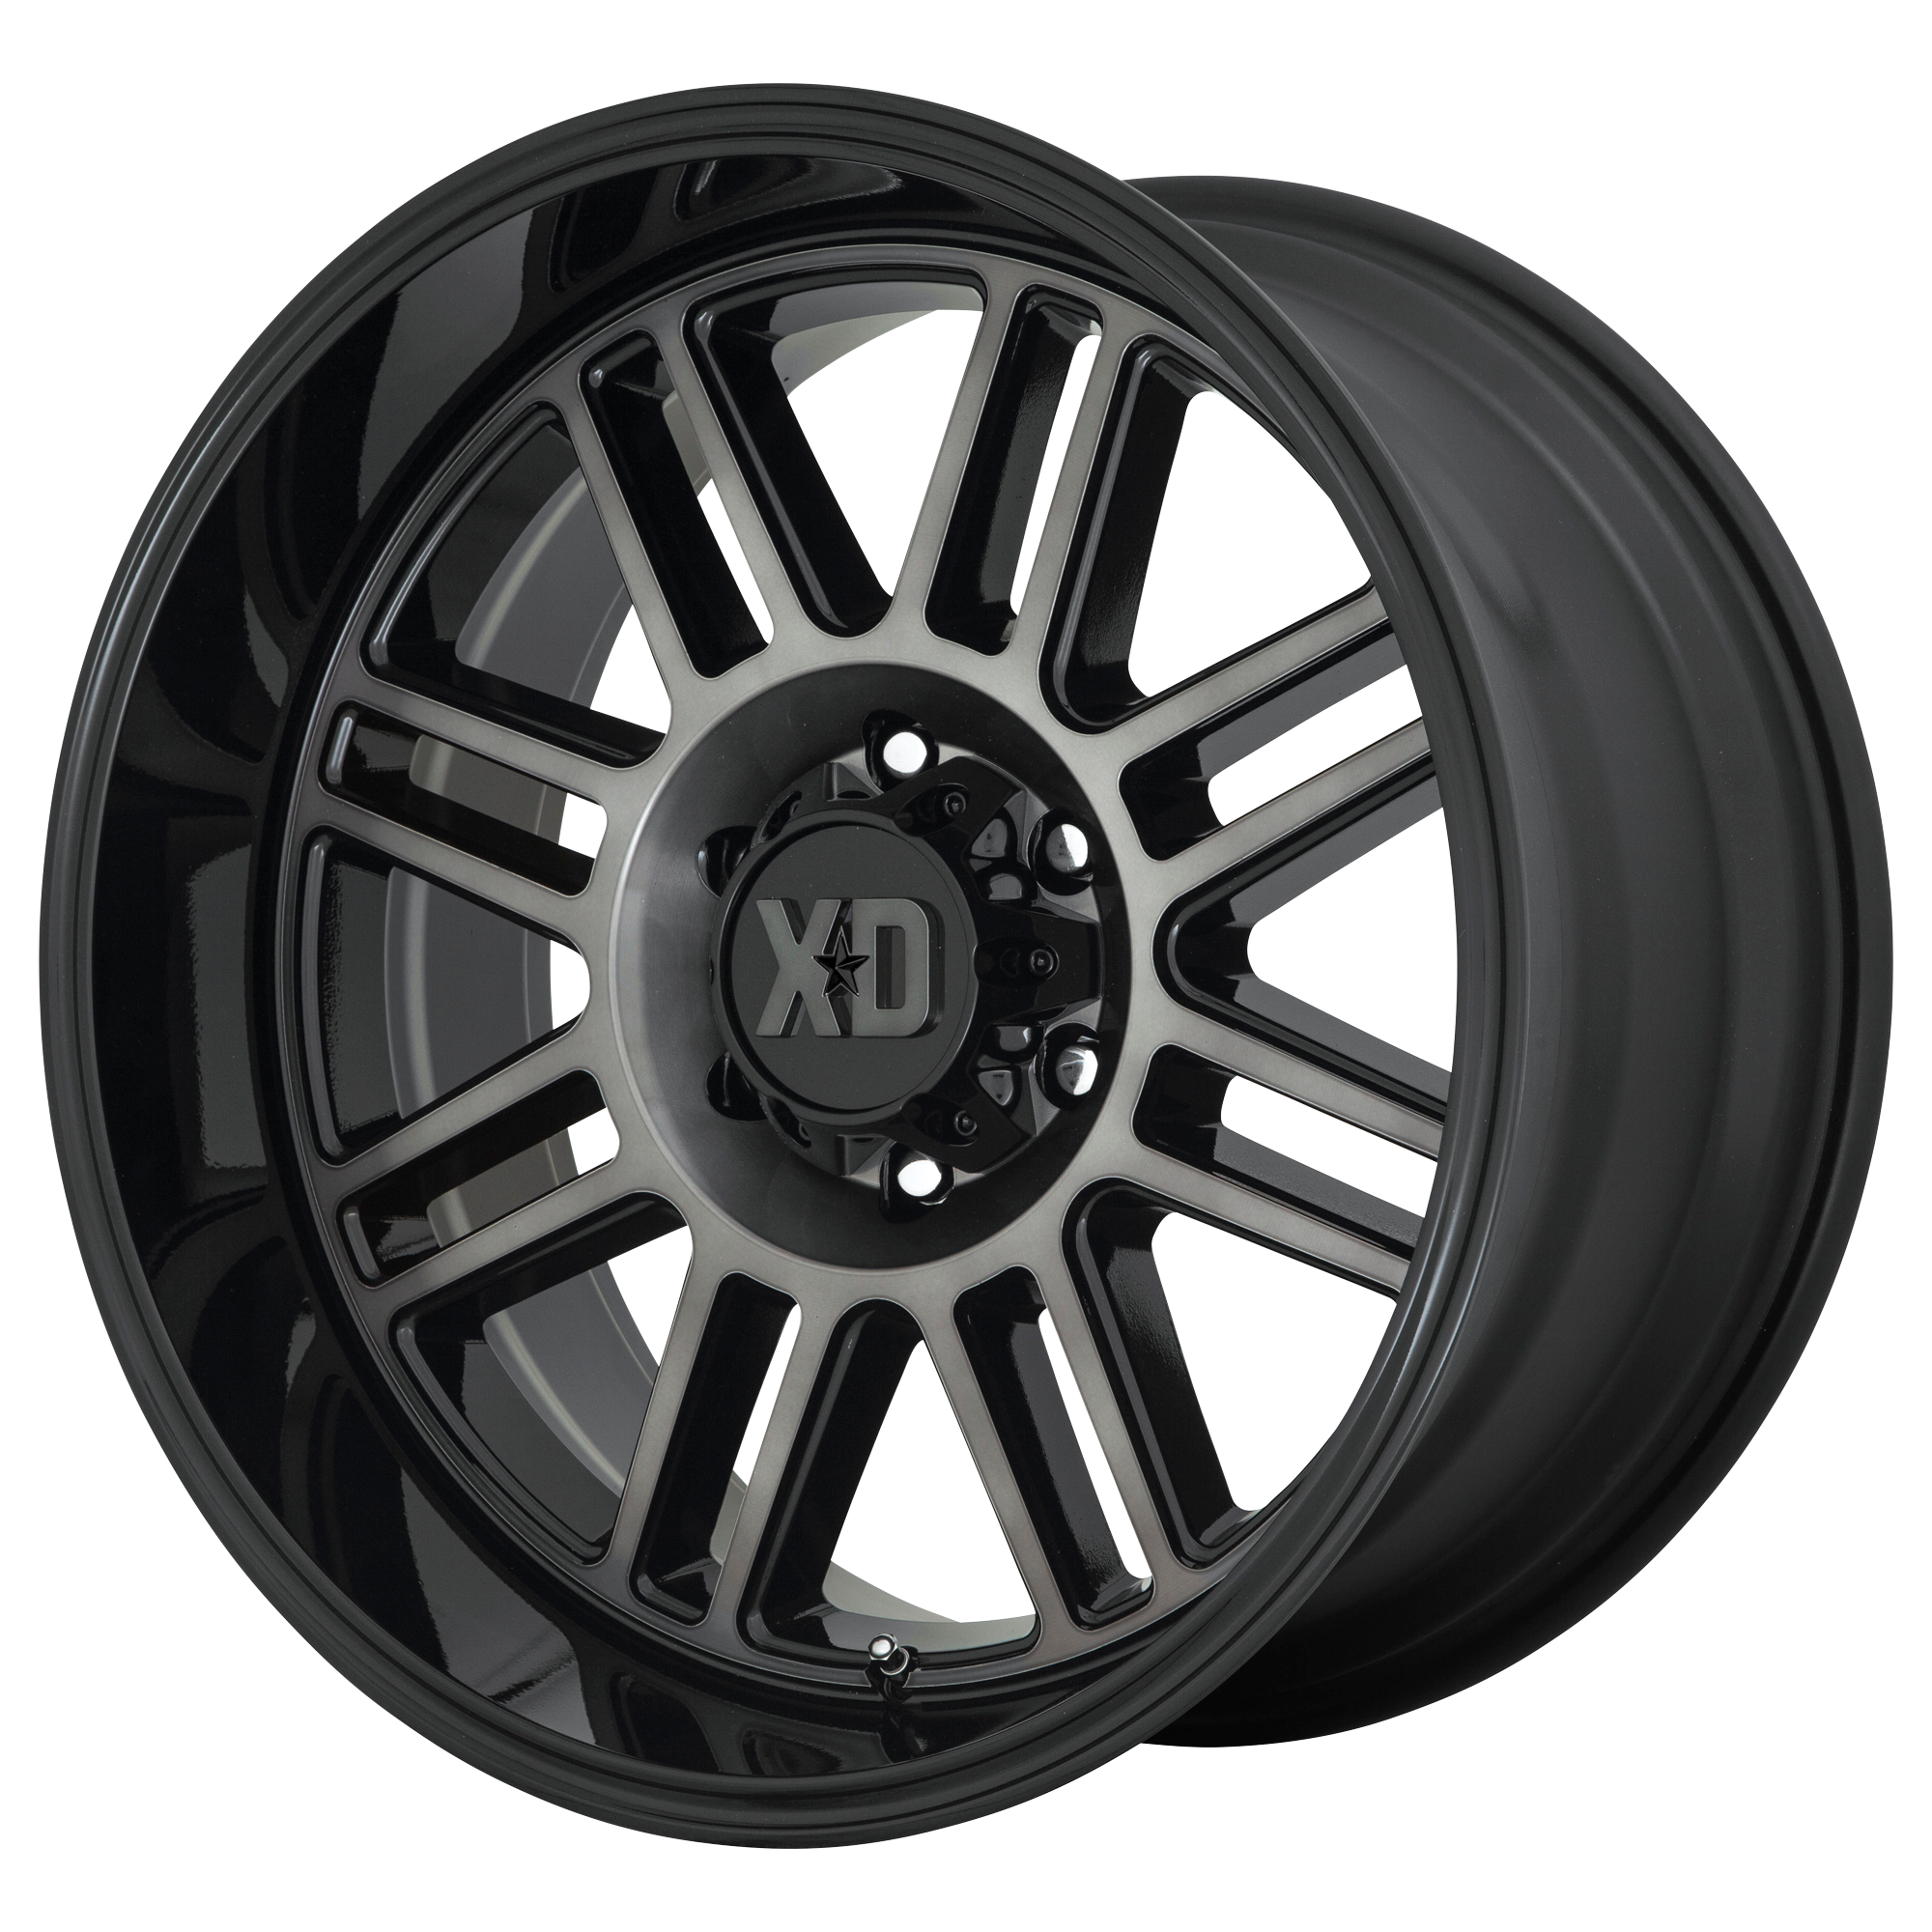 CAGE 20x9 5x127.00 GLOSS BLACK W/ GRAY TINT (18 mm) - Tires and Engine Performance